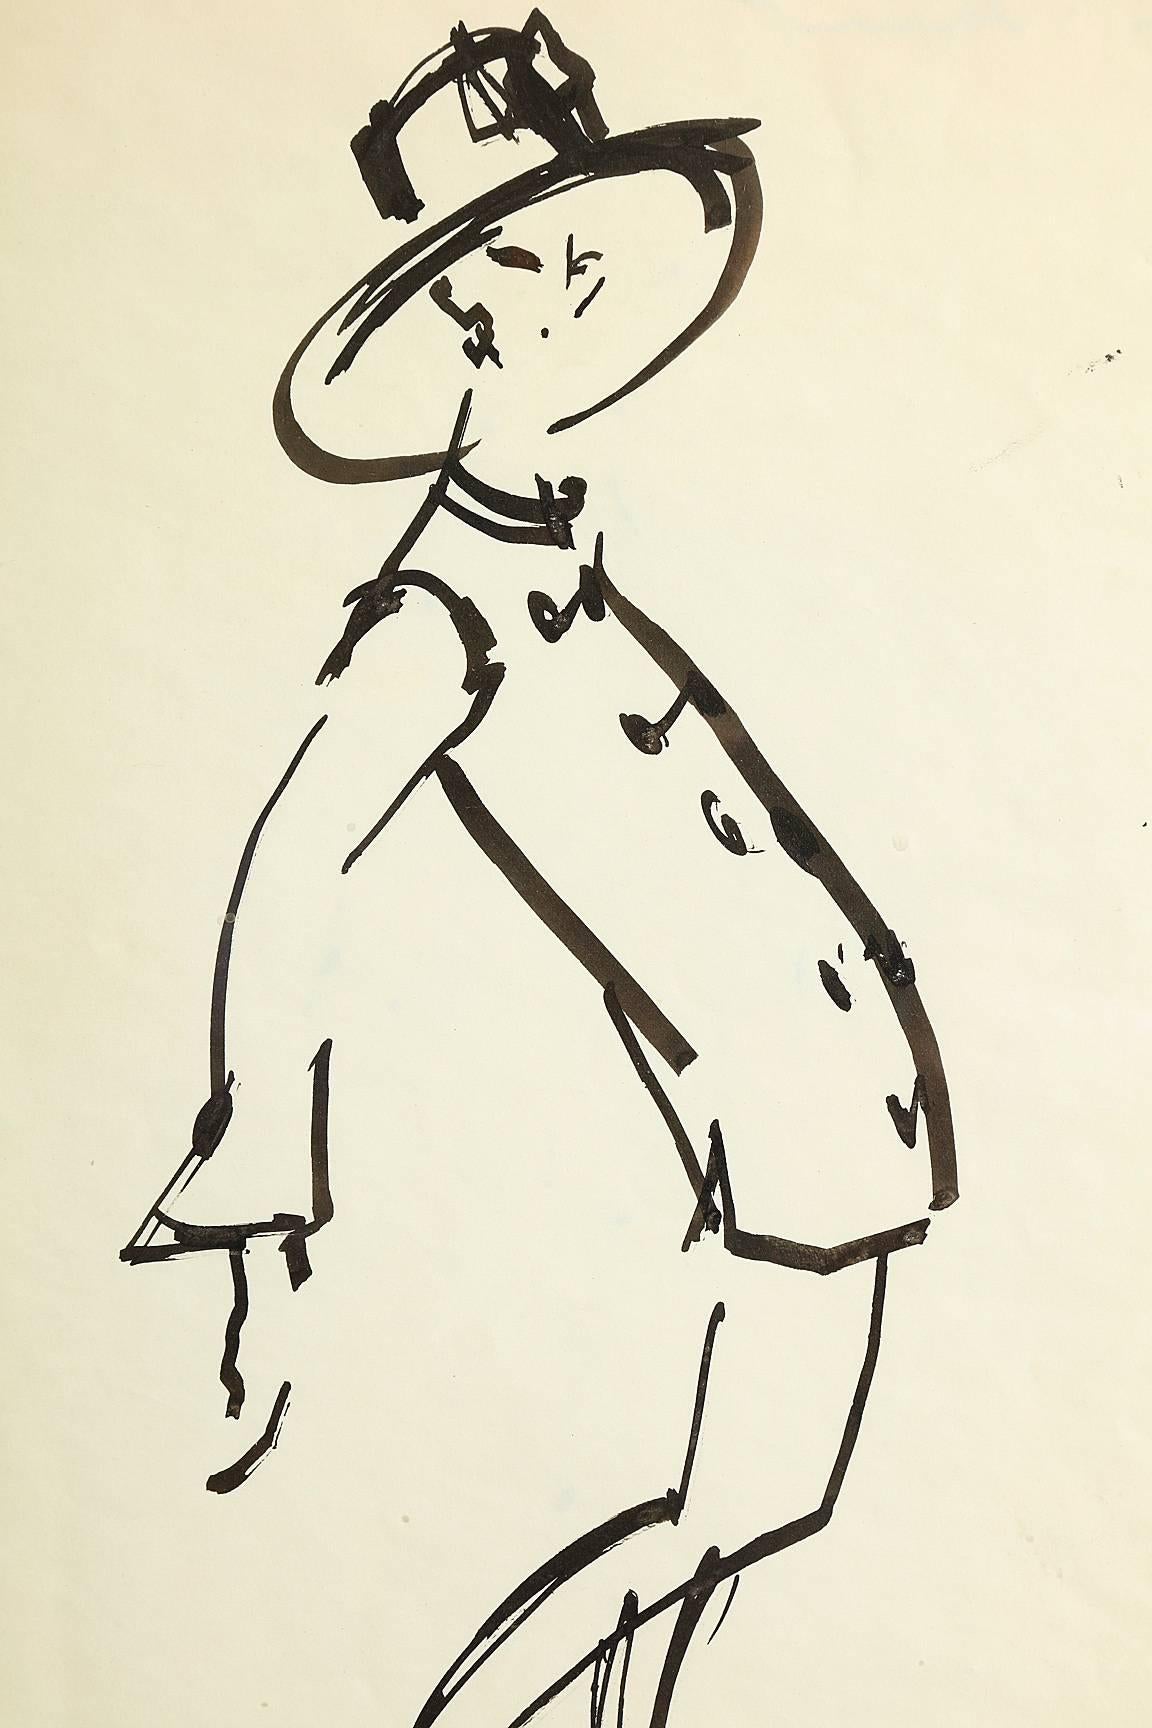 Graphic fashion illustration of a design from Yves Saint Laurent's first collection under his own name in 1962 by Joe Eula. Eula, who later was Halston's creative director, began his career illustrating the collections for such fashion journalists